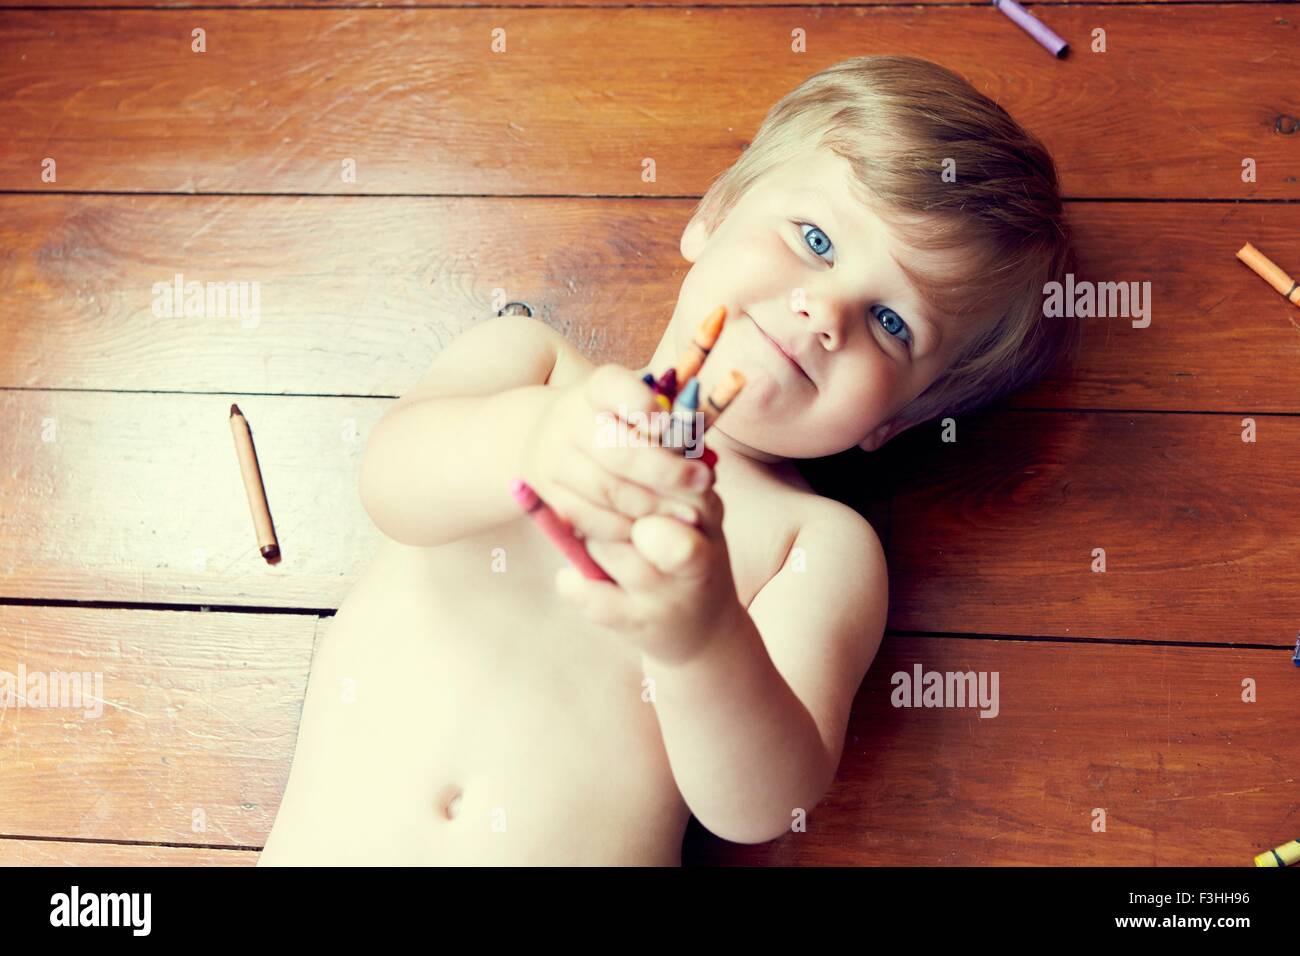 High angle view of boy lying on back on wooden floor holding crayons, looking at camera Stock Photo